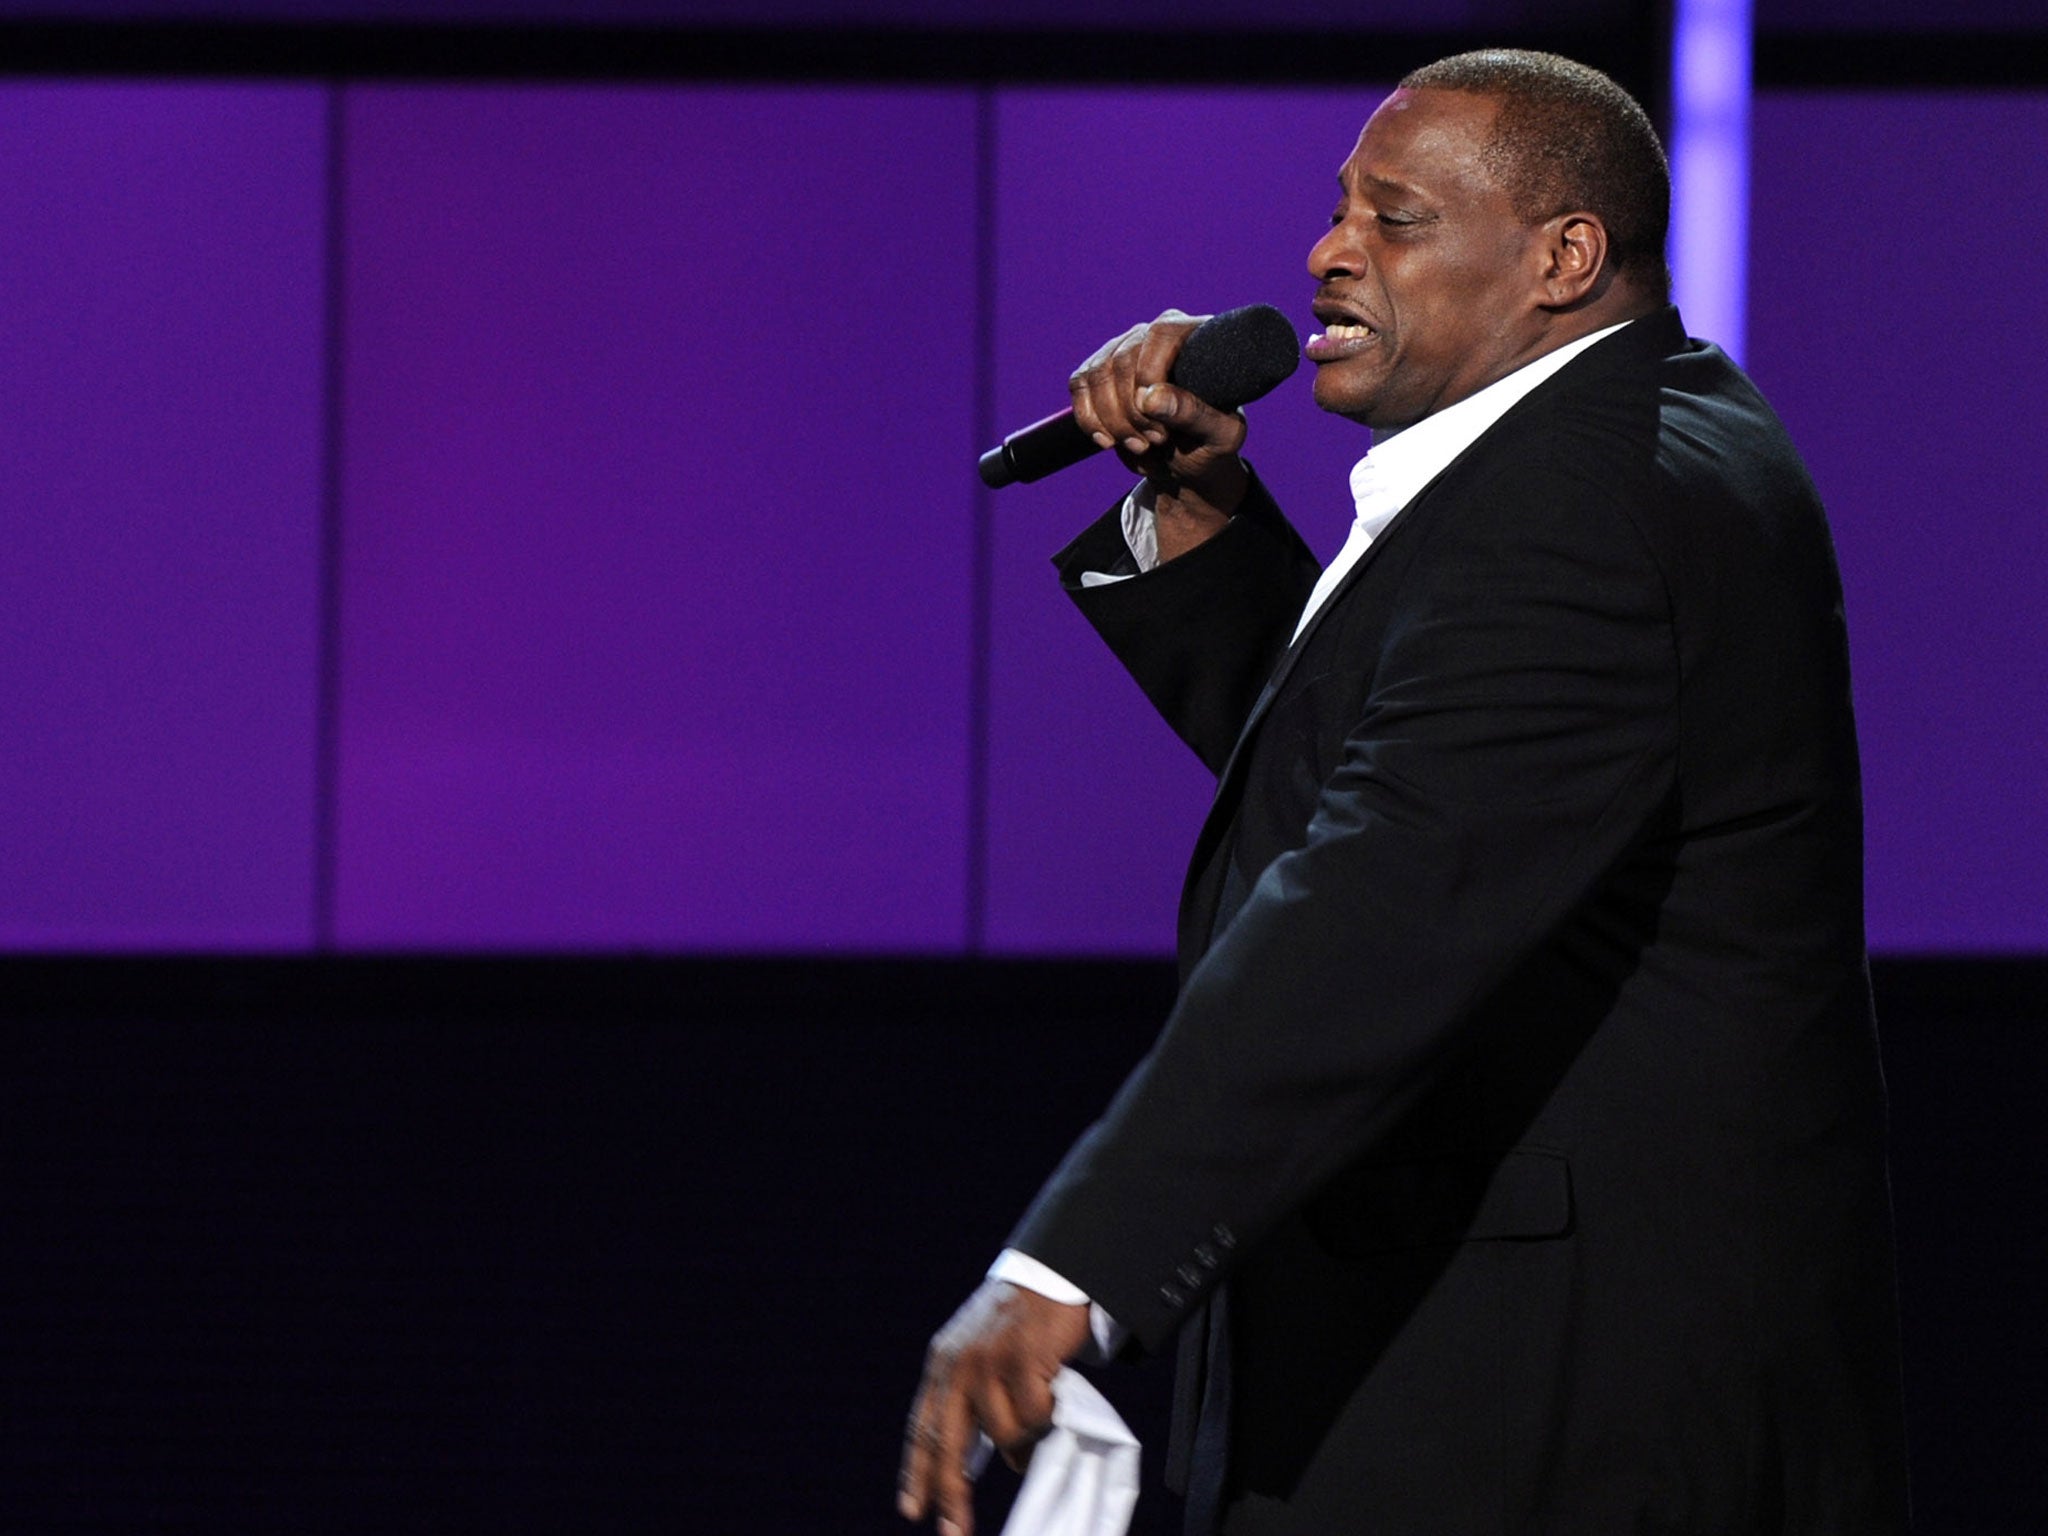 Alexander O'Neal perform onstage during the BET Awards 2011 in Los Angeles, California